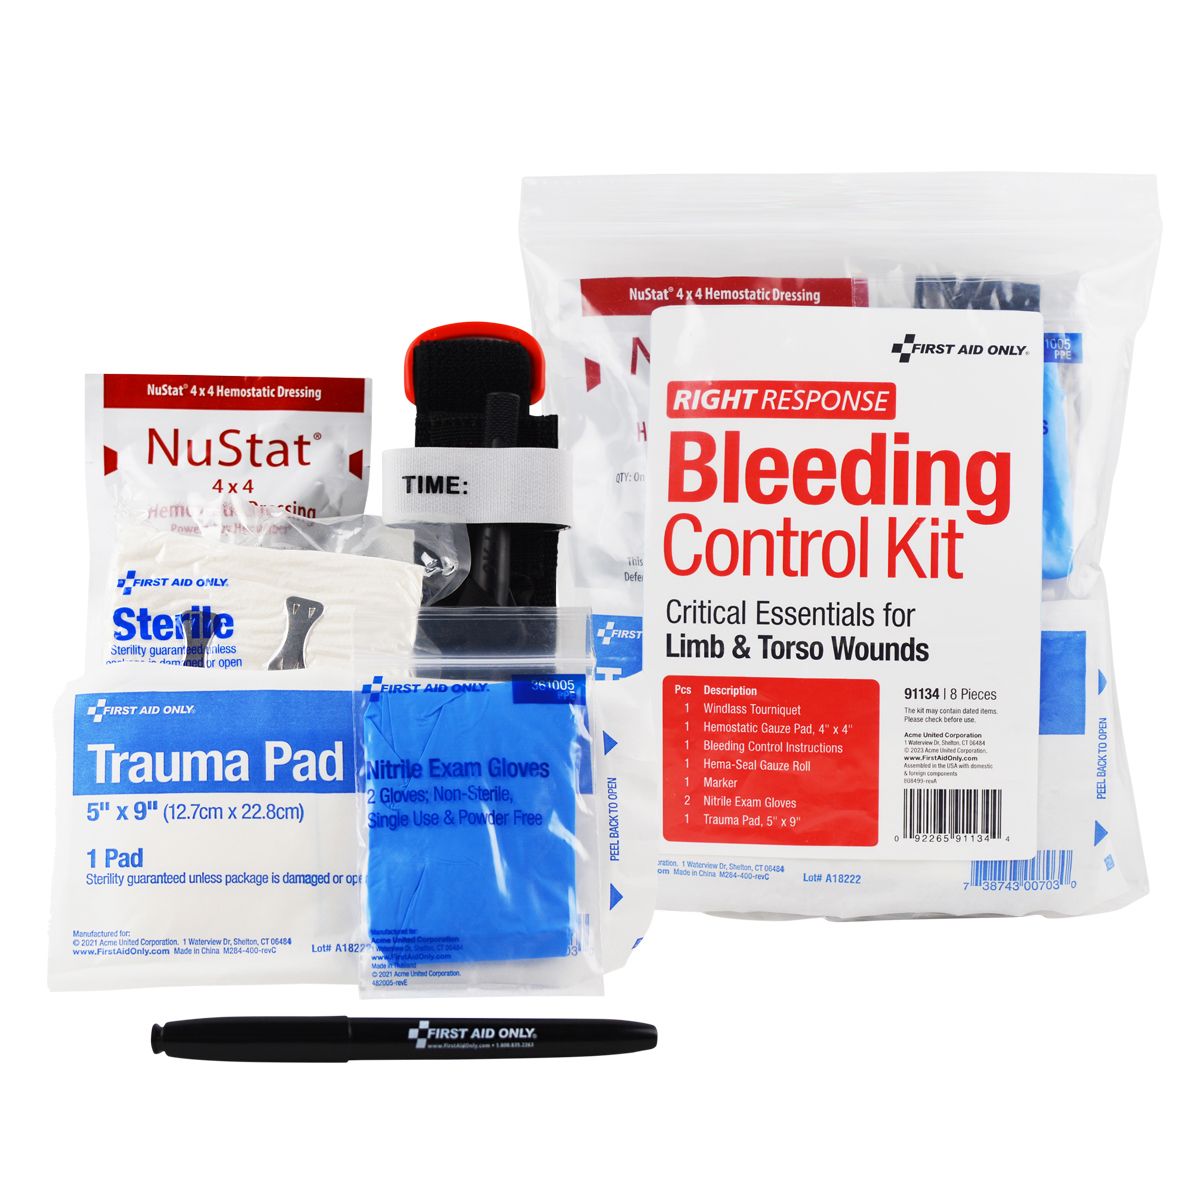 First Aid Only Critical Essentials Bleeding Control Kit For Limb & Torso Wounds 91134